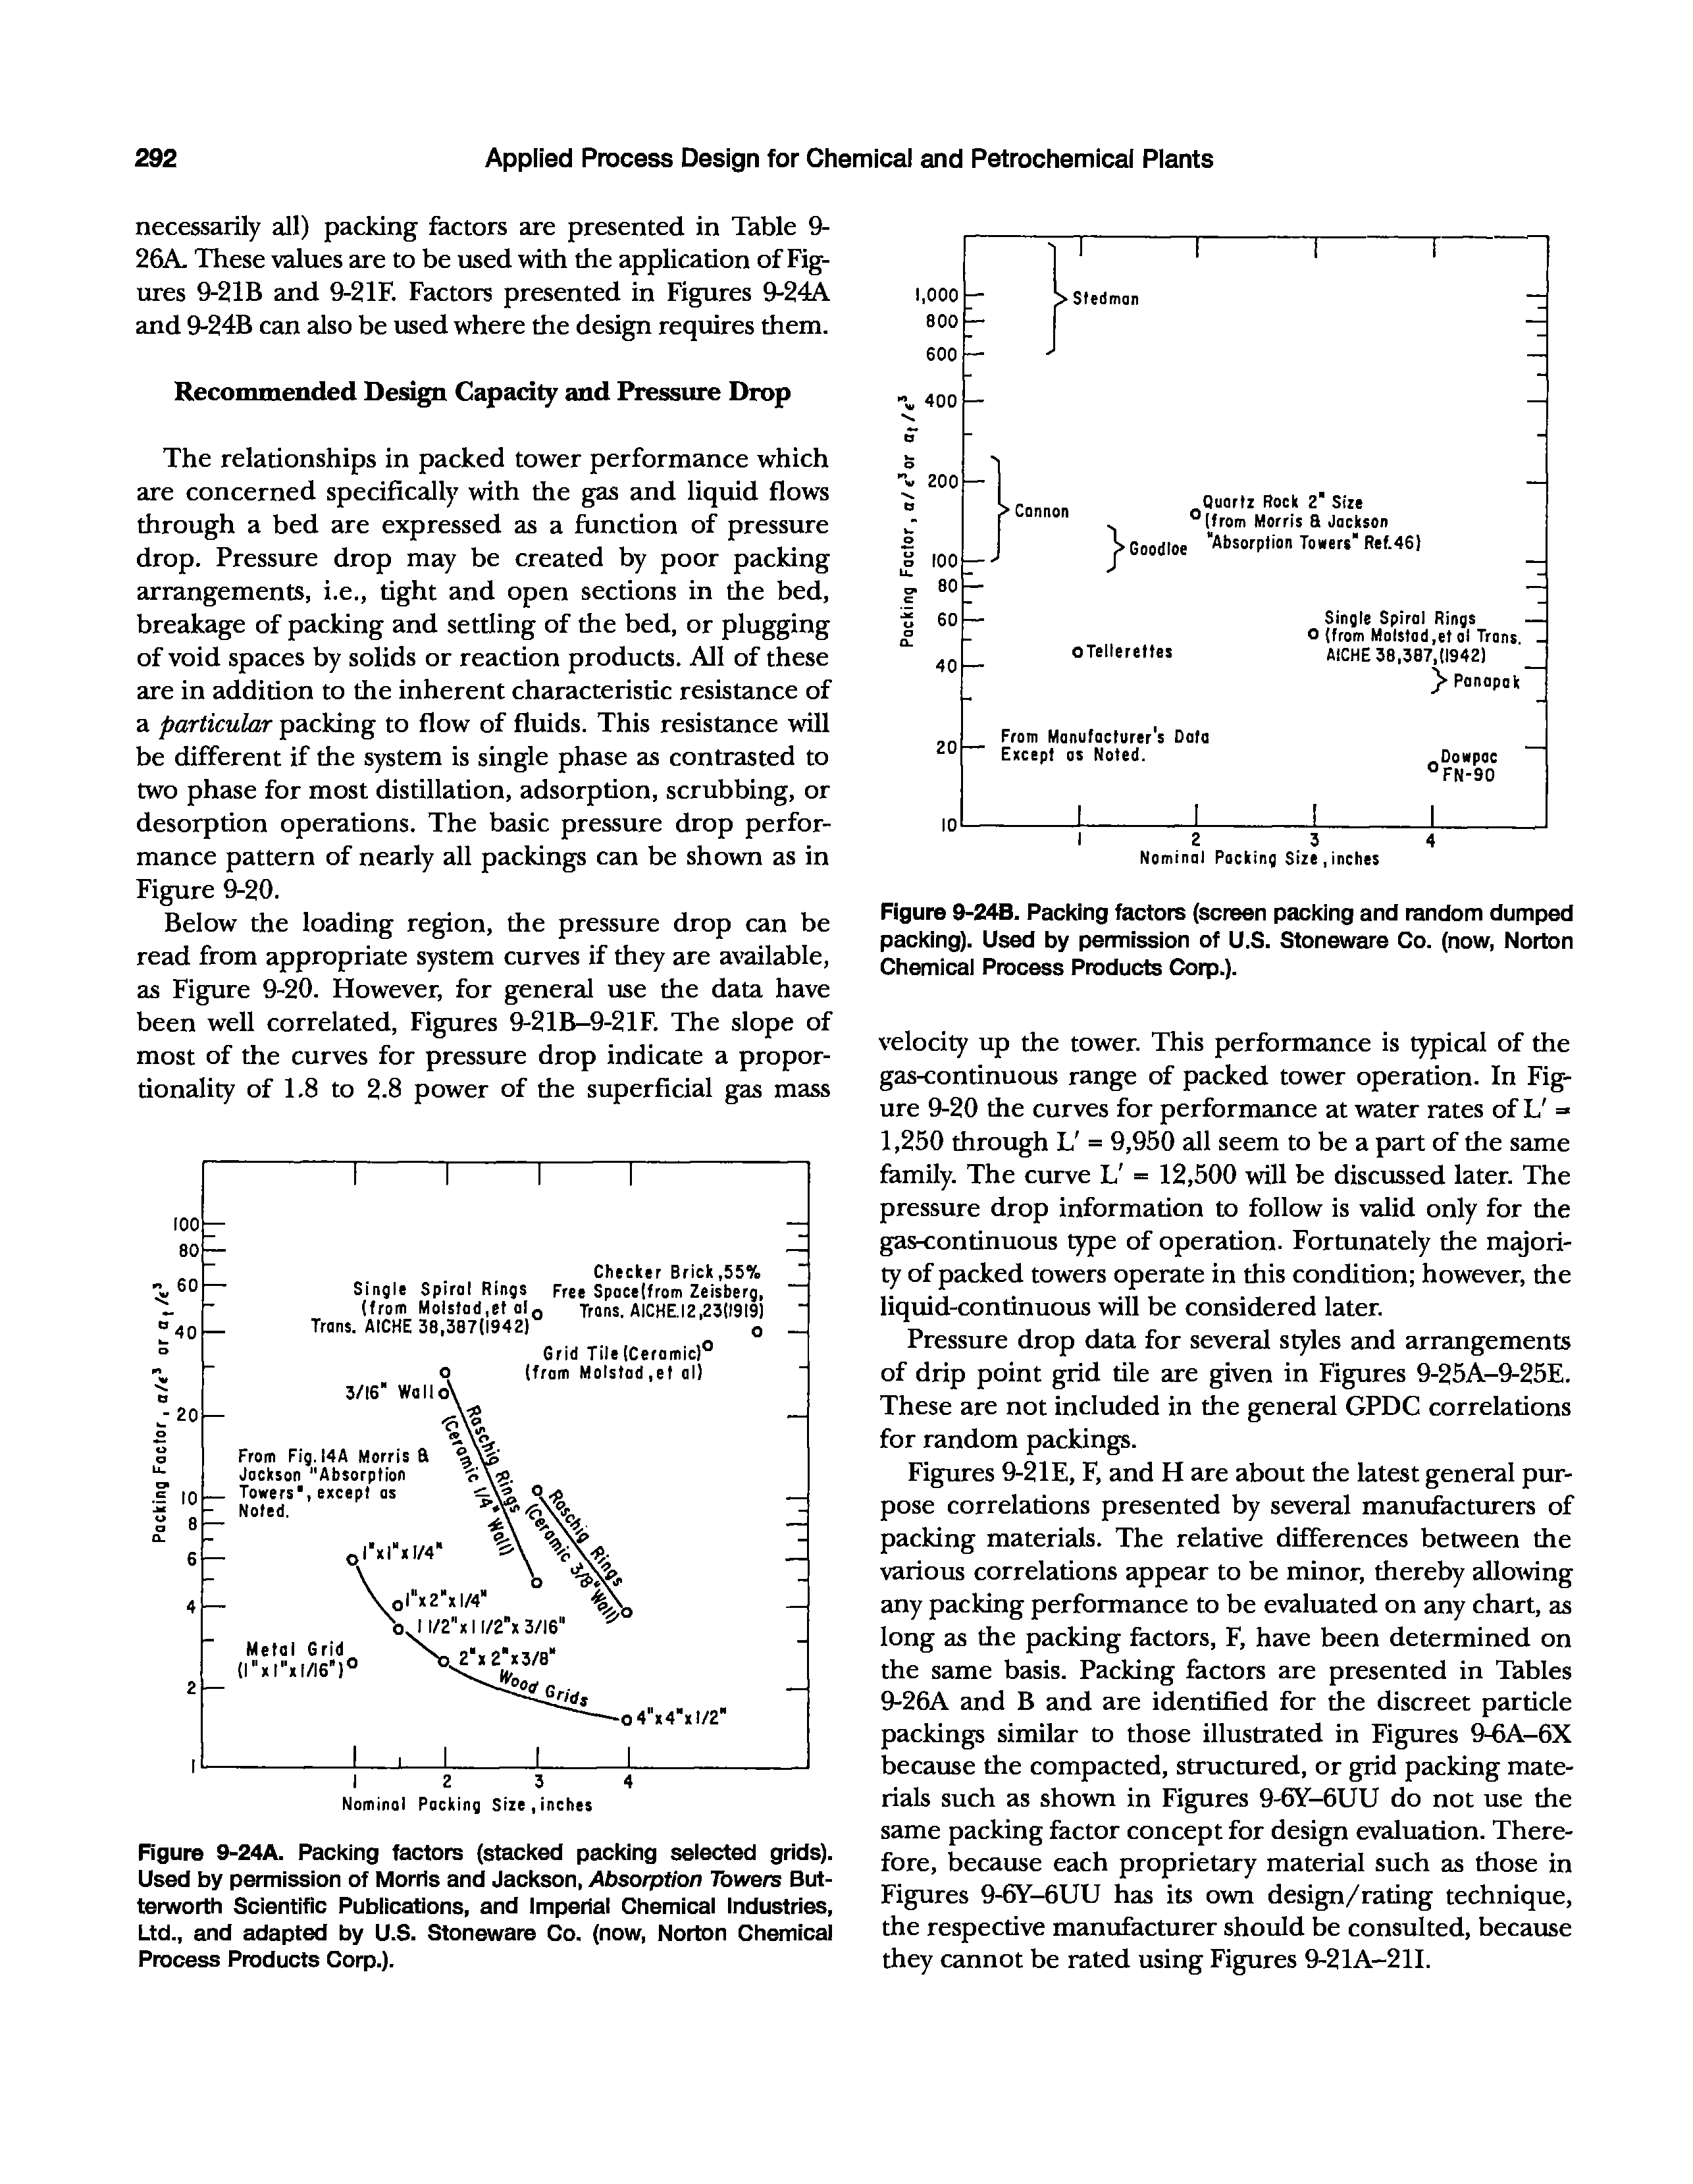 Figure 9-24A. Packing factors (stacked packing selected grids). Used by permission of Morris and Jackson, Absorption Towers But-terworth Scientific Publications, and imperial Chemical Industries, Ltd., and adapted by U.S. Stoneware Co. (now, Norton Chemical Process Products Corp.).